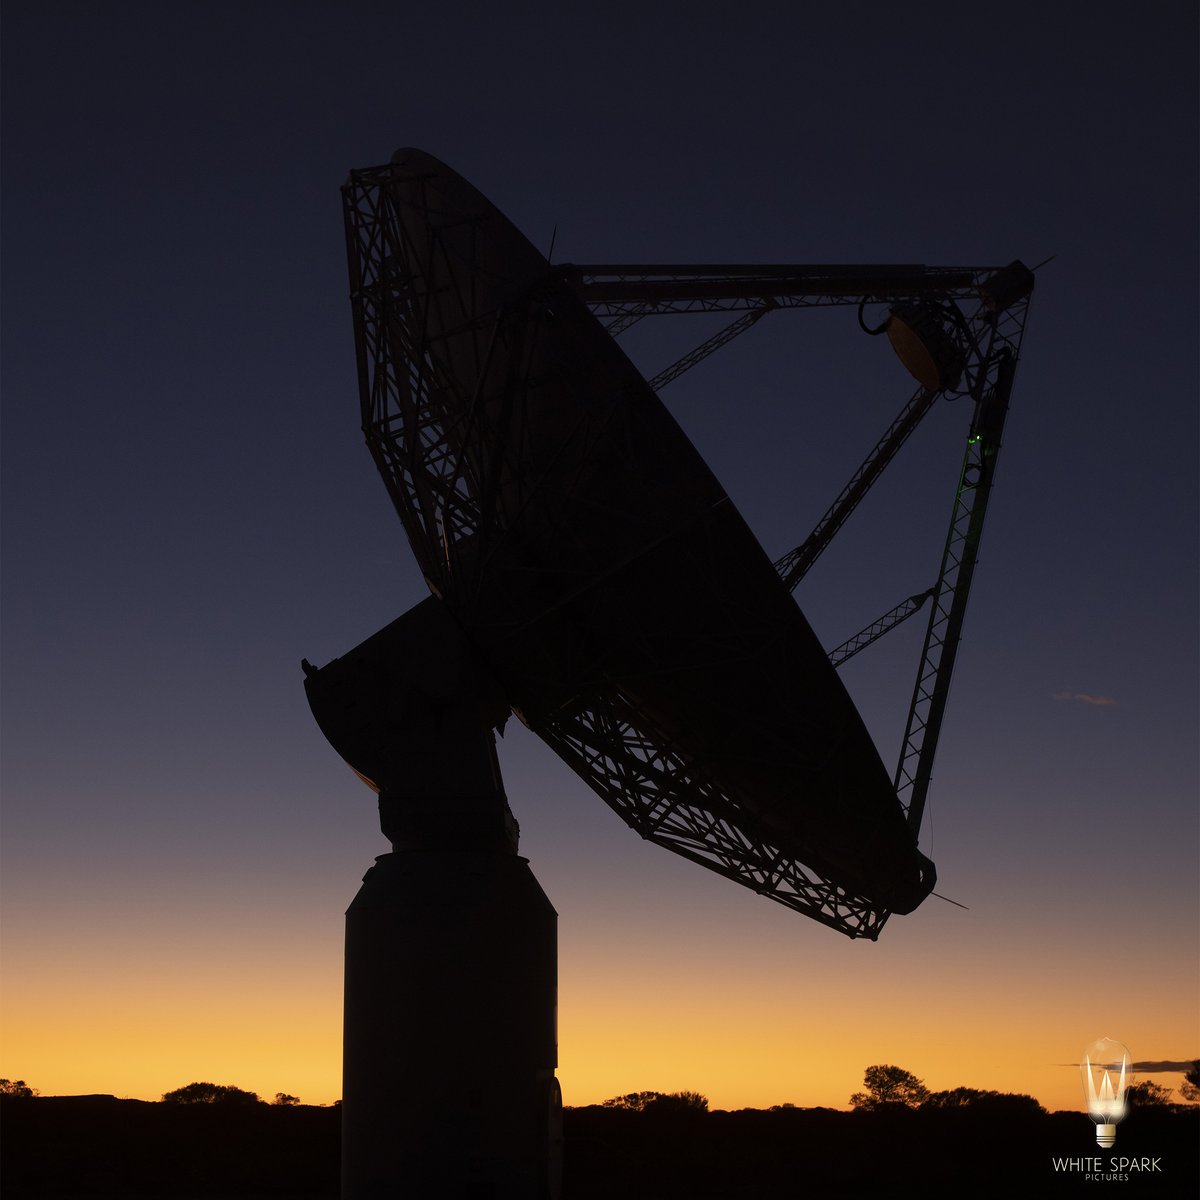 Did you know you can't visit this radio telescopes in real life? But thanks to the immersive experience of Beyond the Milky Way, you can explore the site virtually! 💫 Our VR documentary is now showing at @wamuseum in Kalgoorlie until 5th Nov. Book now! visit.museum.wa.gov.au/goldfields/bey…